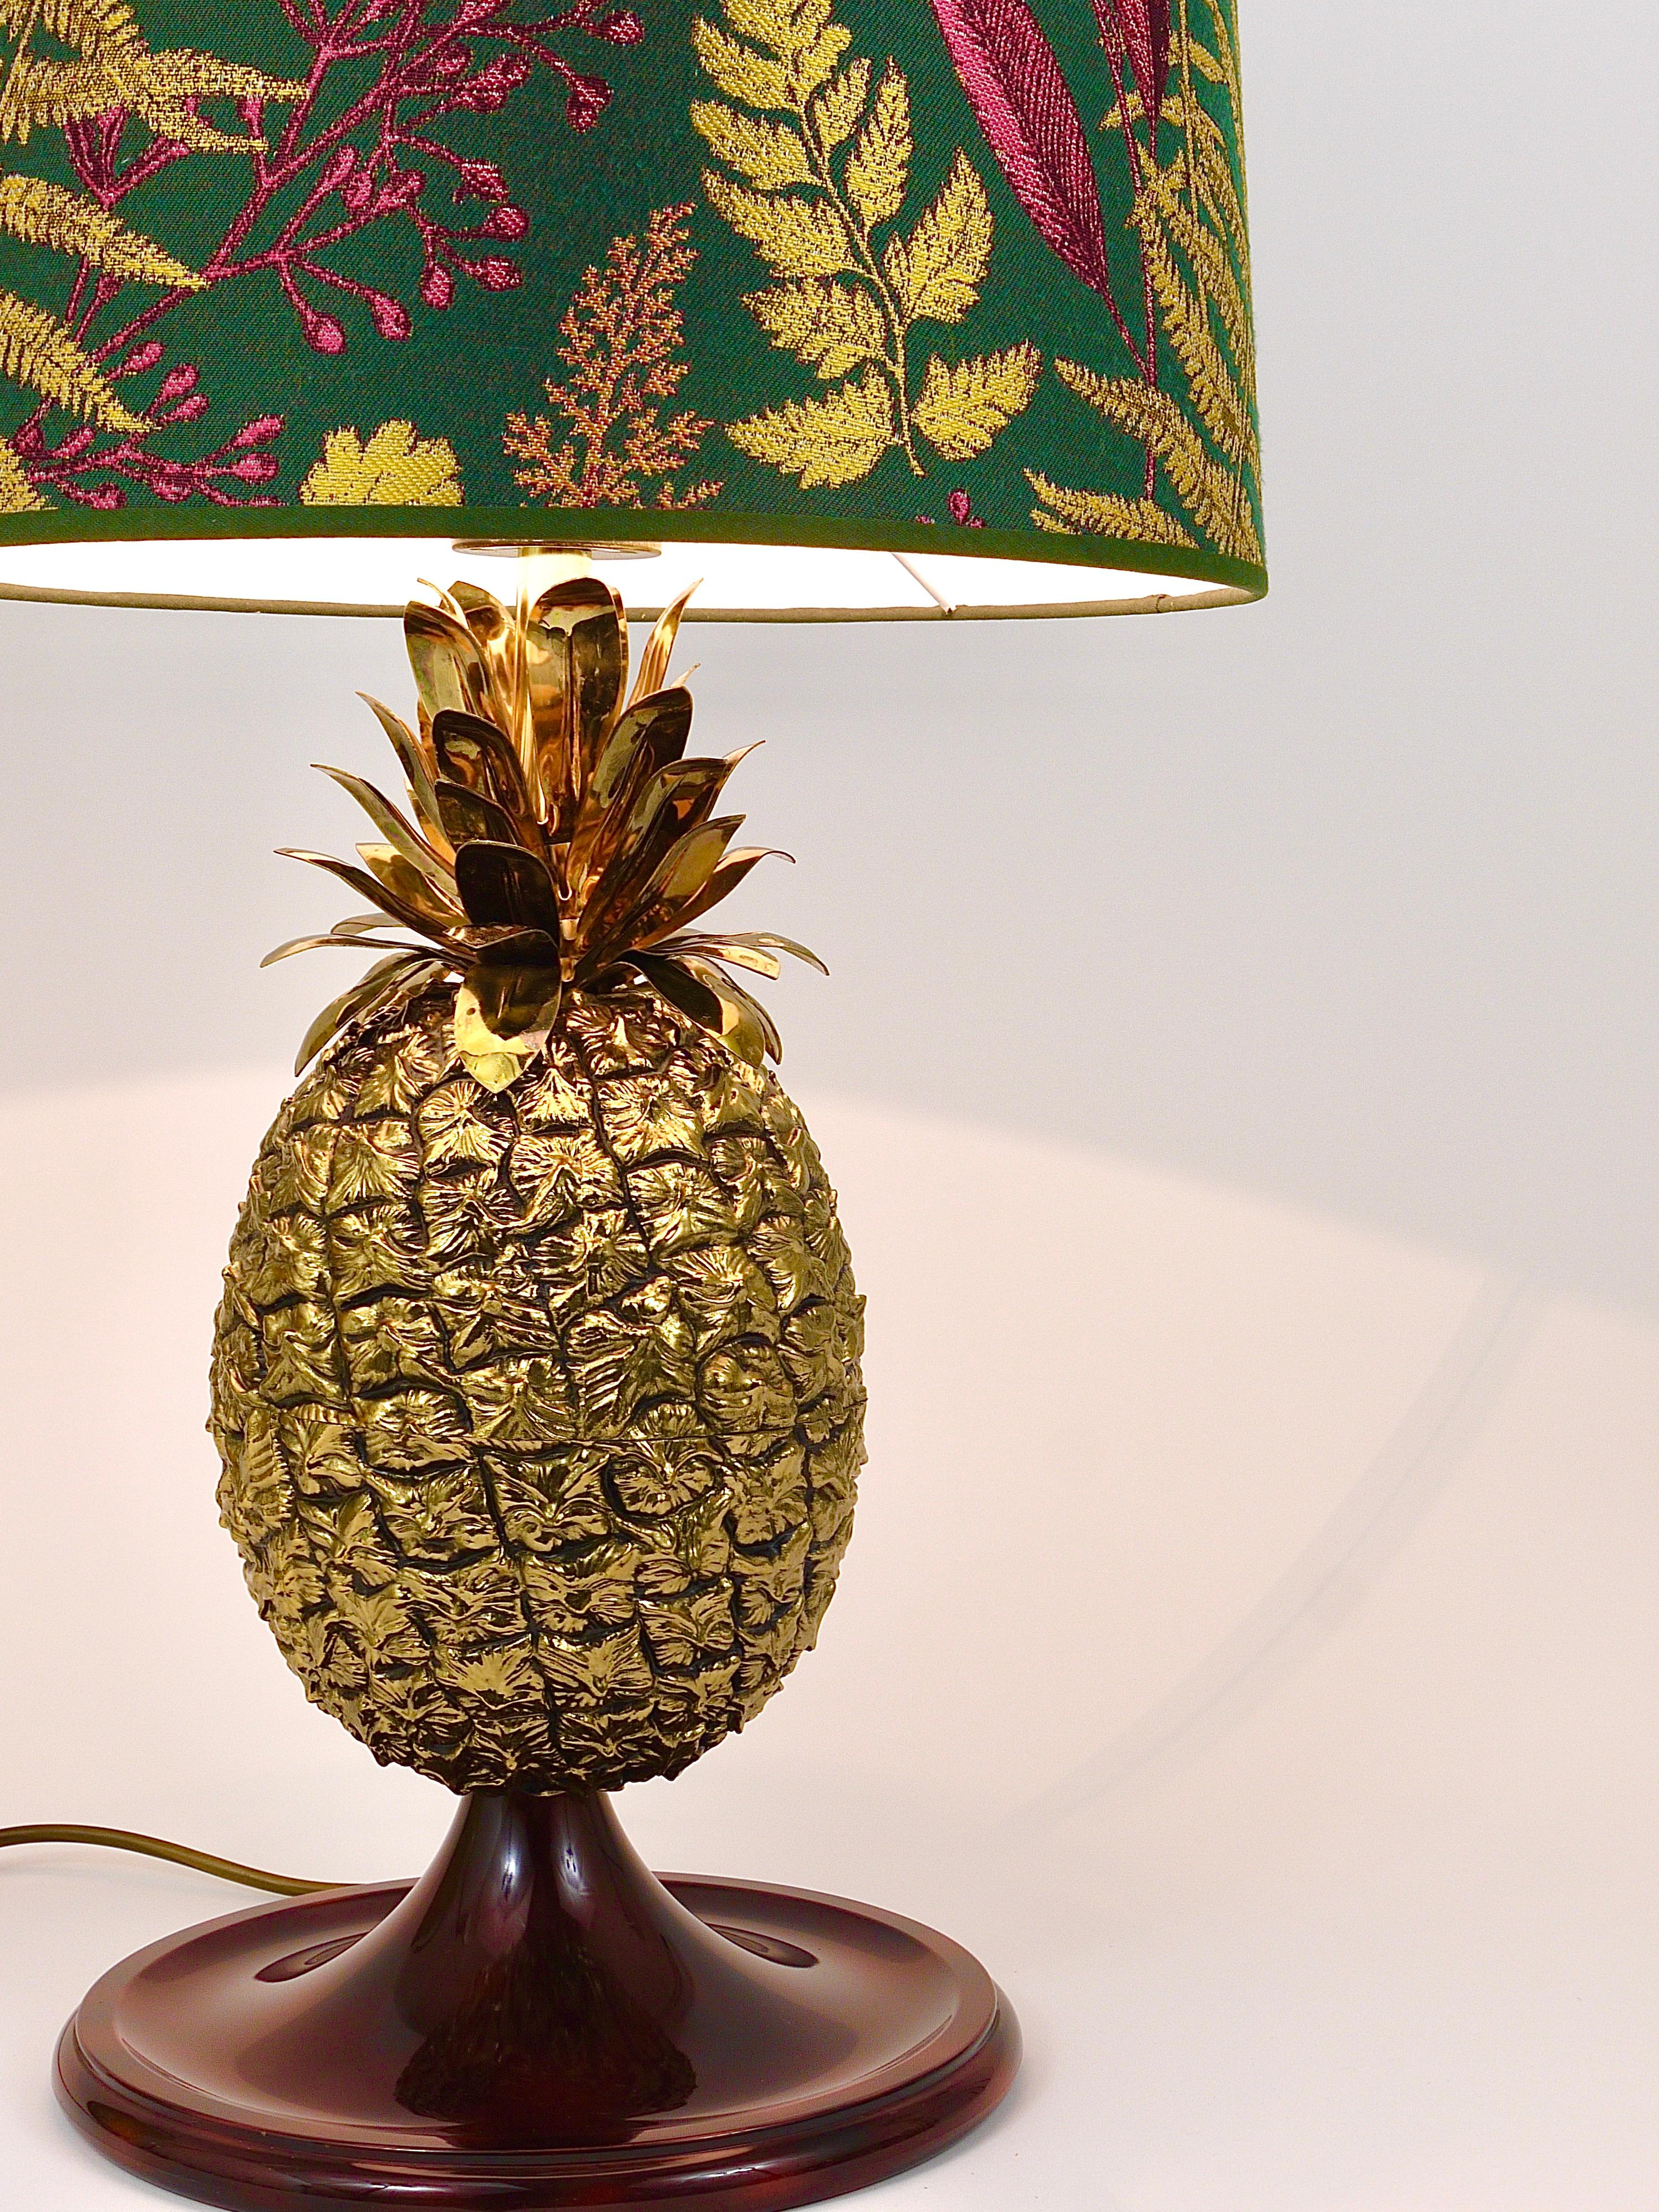 Mauro Manetti Hollywood Regency Pineapple Brass Table Lamp, Italy, 1970s For Sale 14